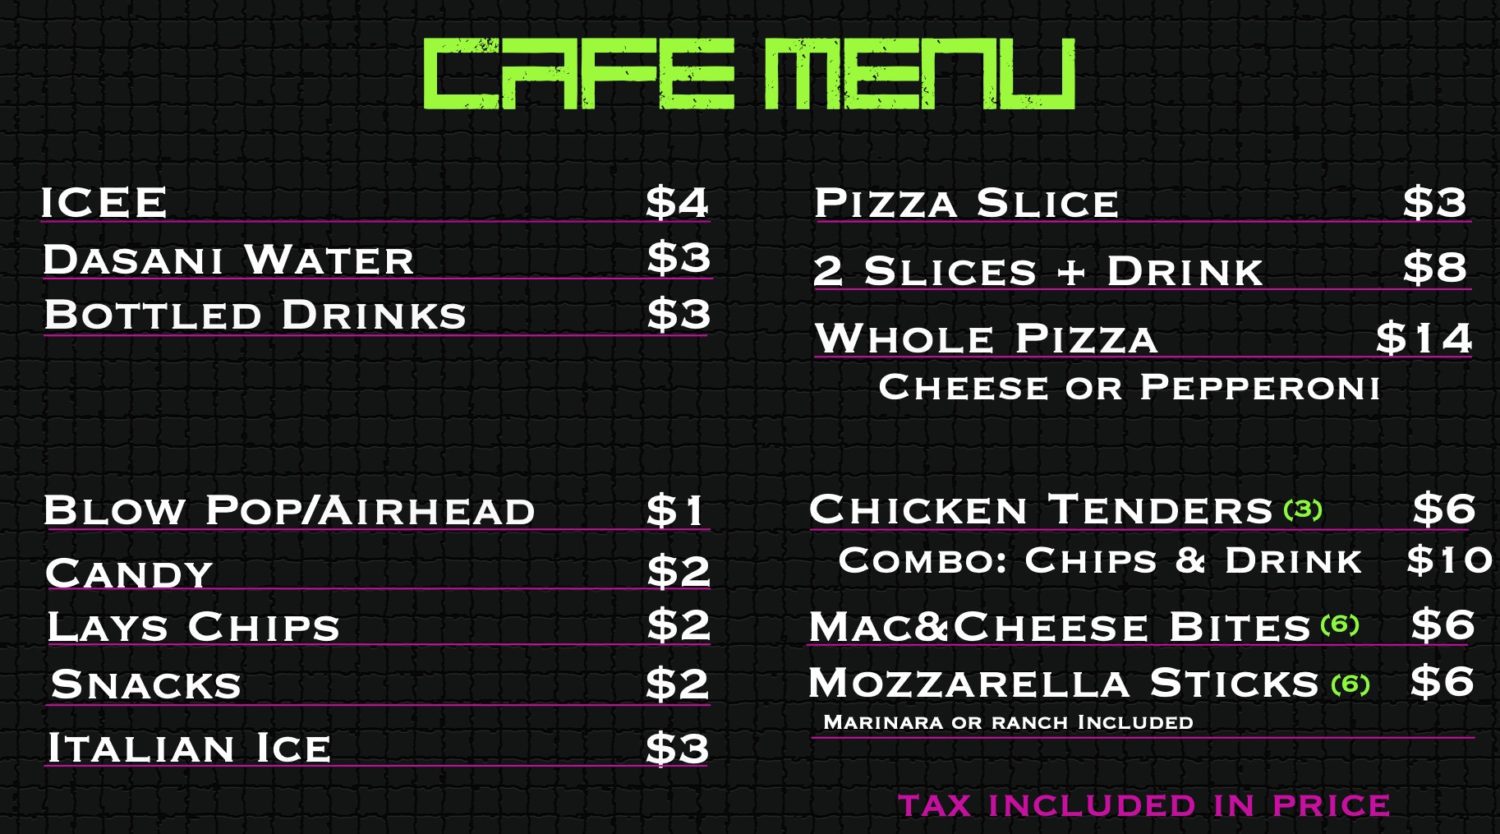 Cafe pricing